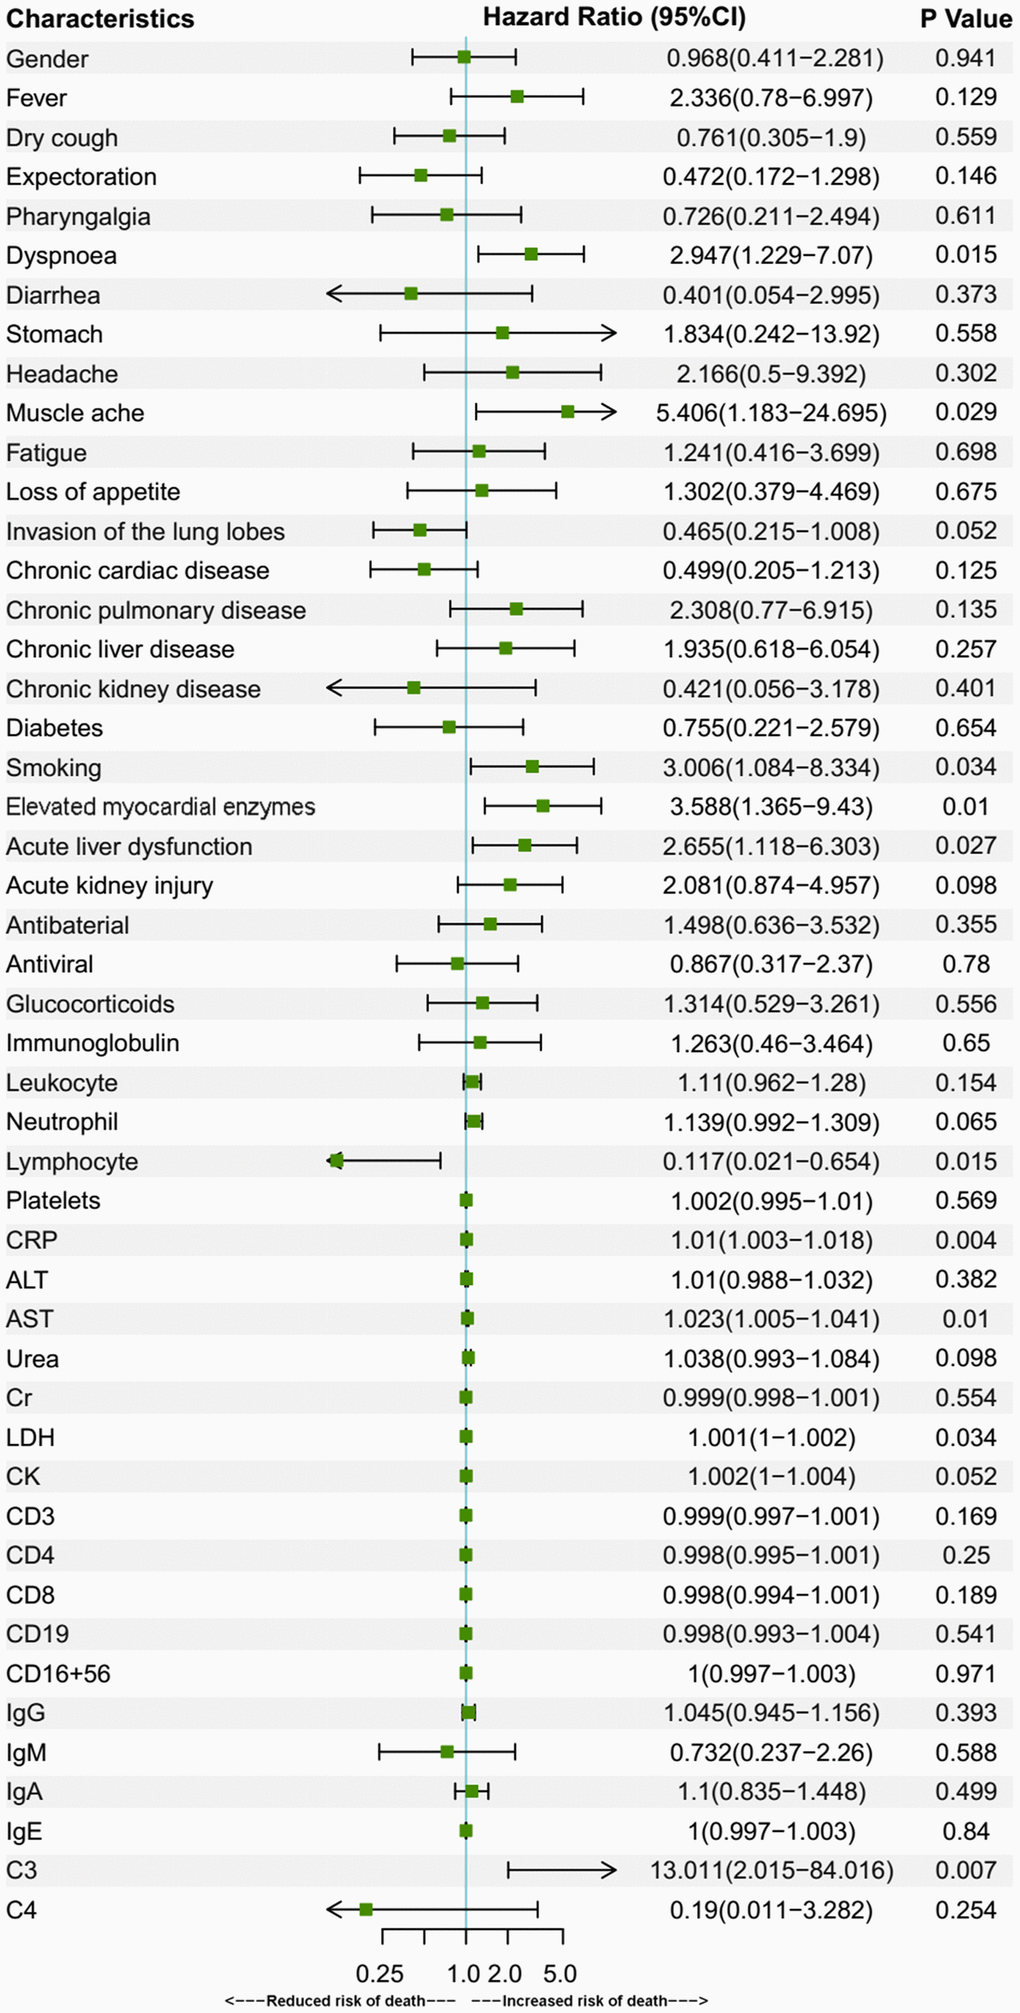 Univariate Cox regression for prognostic factors of over-70 group patients. Univariate Cox regression analysis of fatality risk factors in over-70 patients. Elevated myocardial enzymes were defined if serum LDH or CK was above the upper reference limit. Data are represented as means with 95% confidence intervals. Abbreviations: CI, confidence interval; CRP, C-reactive protein; ALT, alanine aminotransferase; AST, aspartate aminotransferase; Cr, creatinine; LDH, lactate dehydrogenase; CK, creatine kinase.